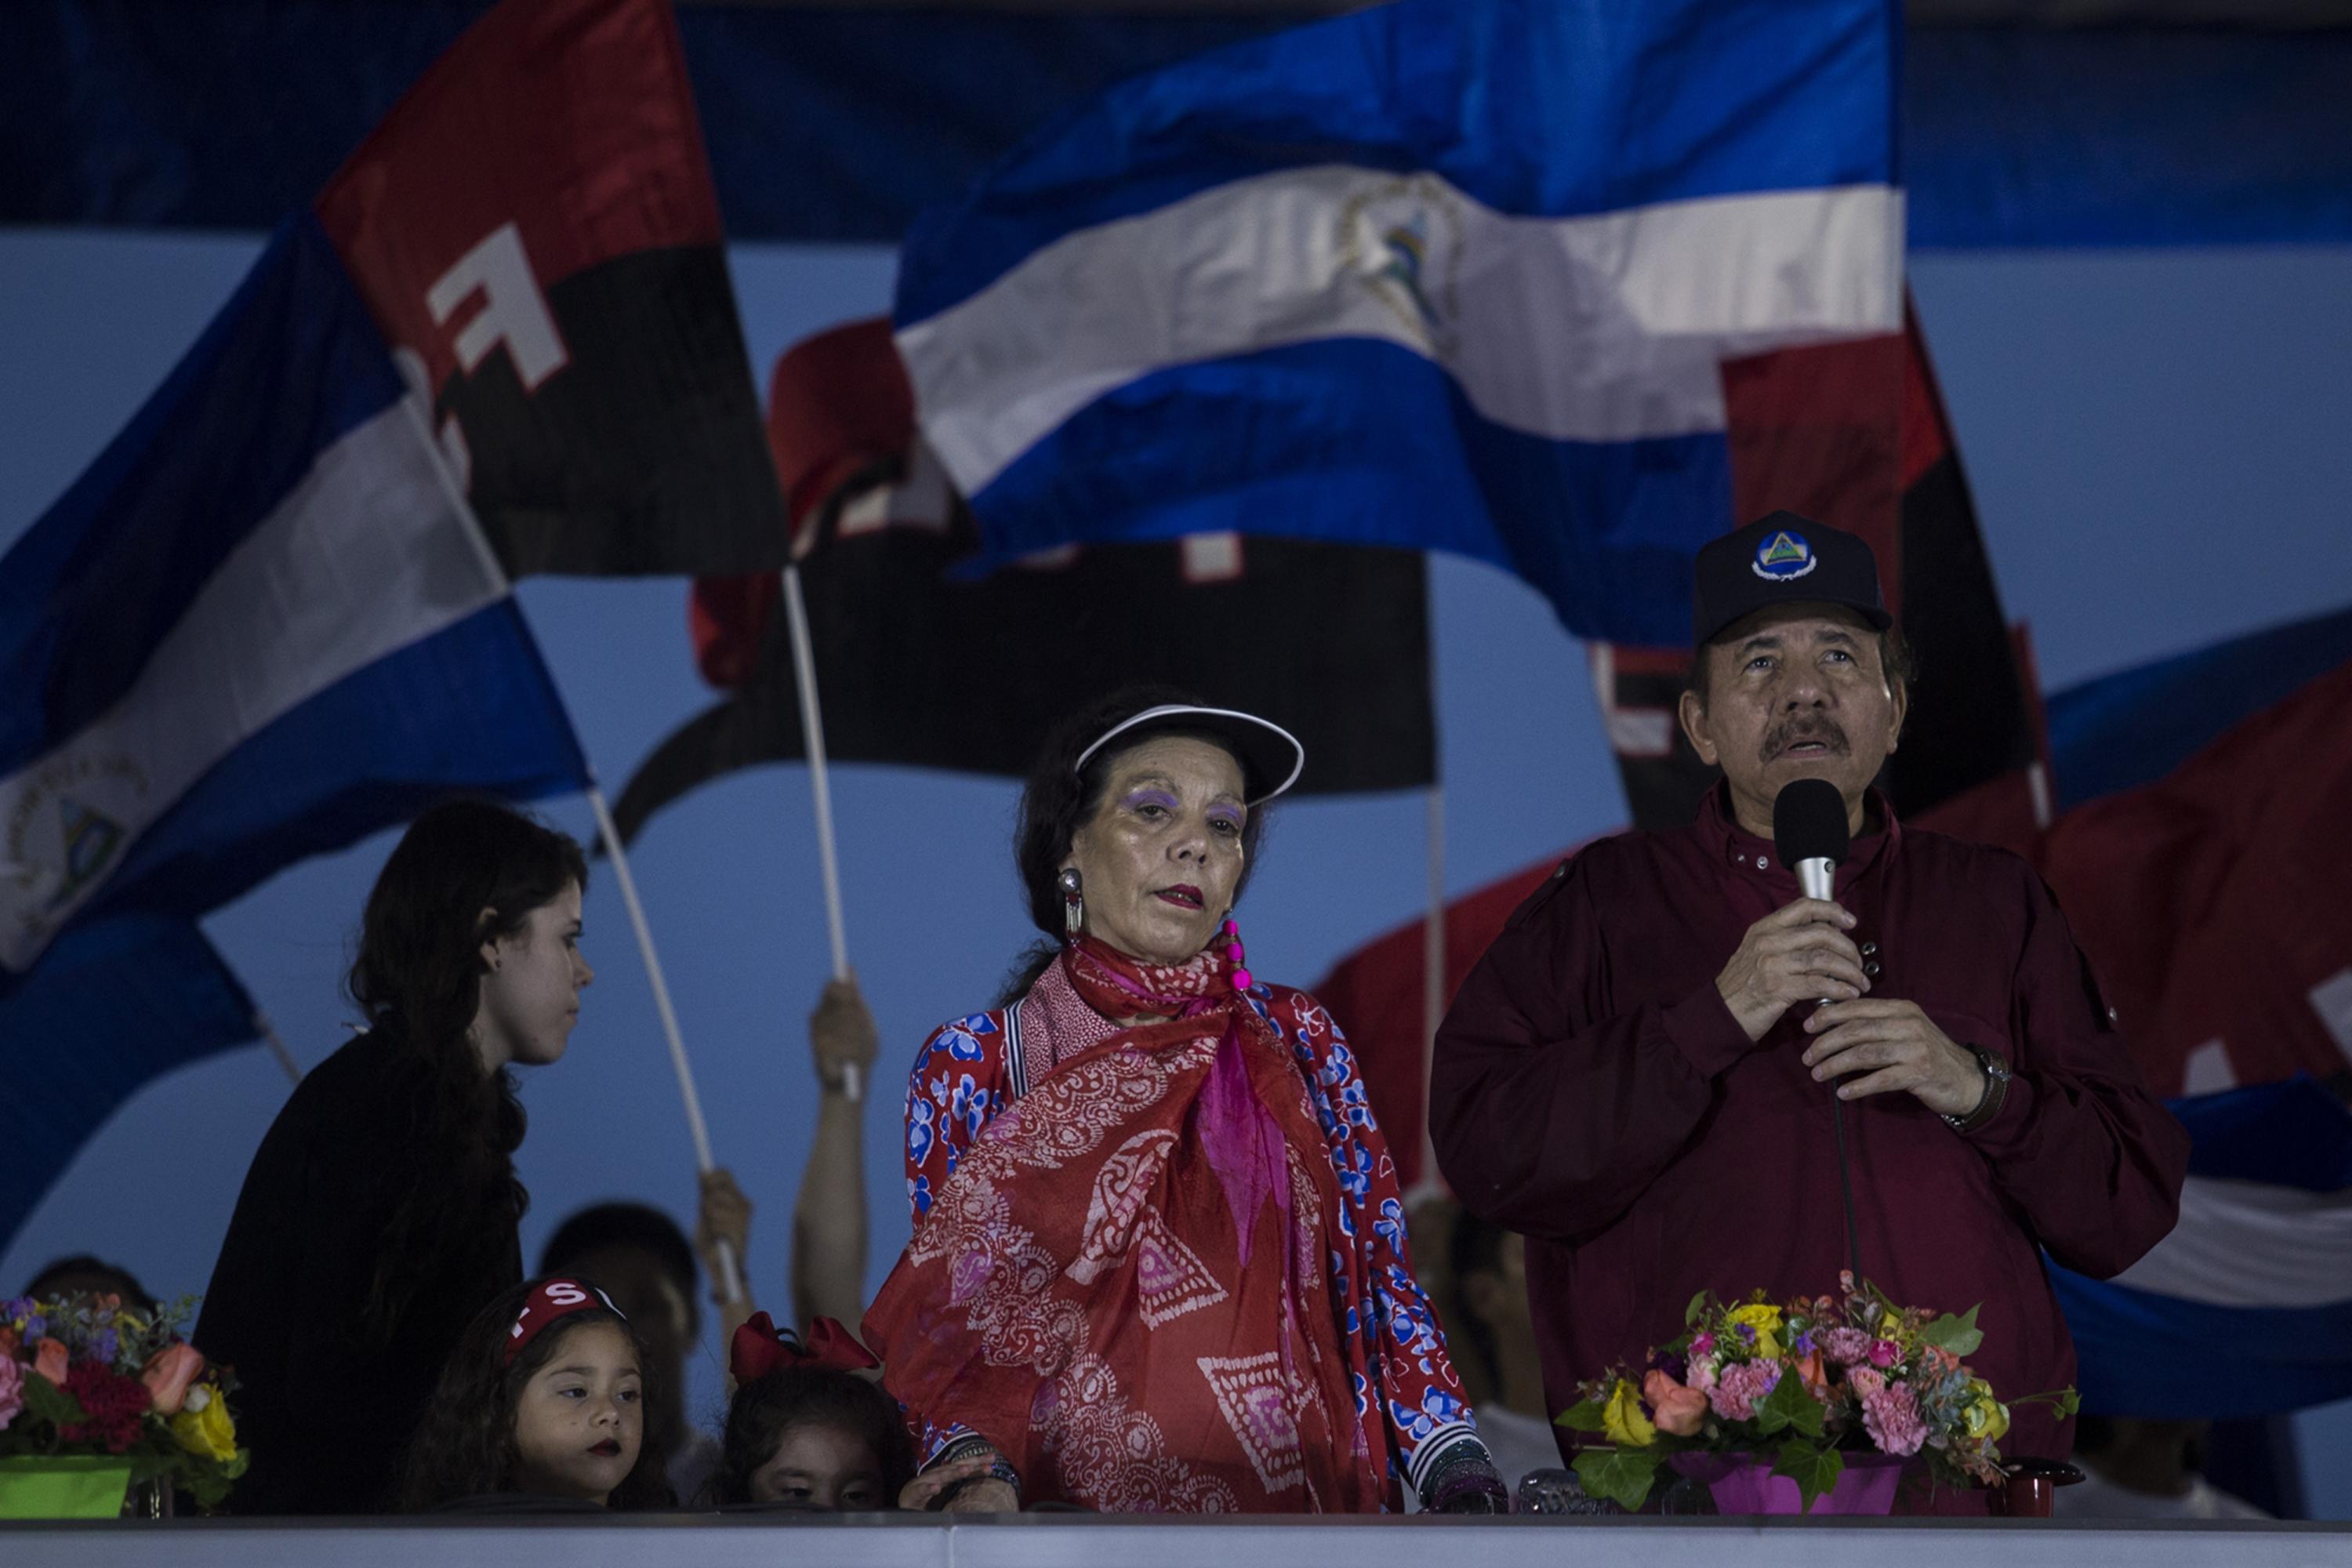 Daniel Ortega and Rosario Murillo addressed the public on Sep. 29, 2018, a day after the regime prohibited protests against the government. Since April, state repression had caused the death of more than 500 Nicaraguans. Photo Víctor Peña